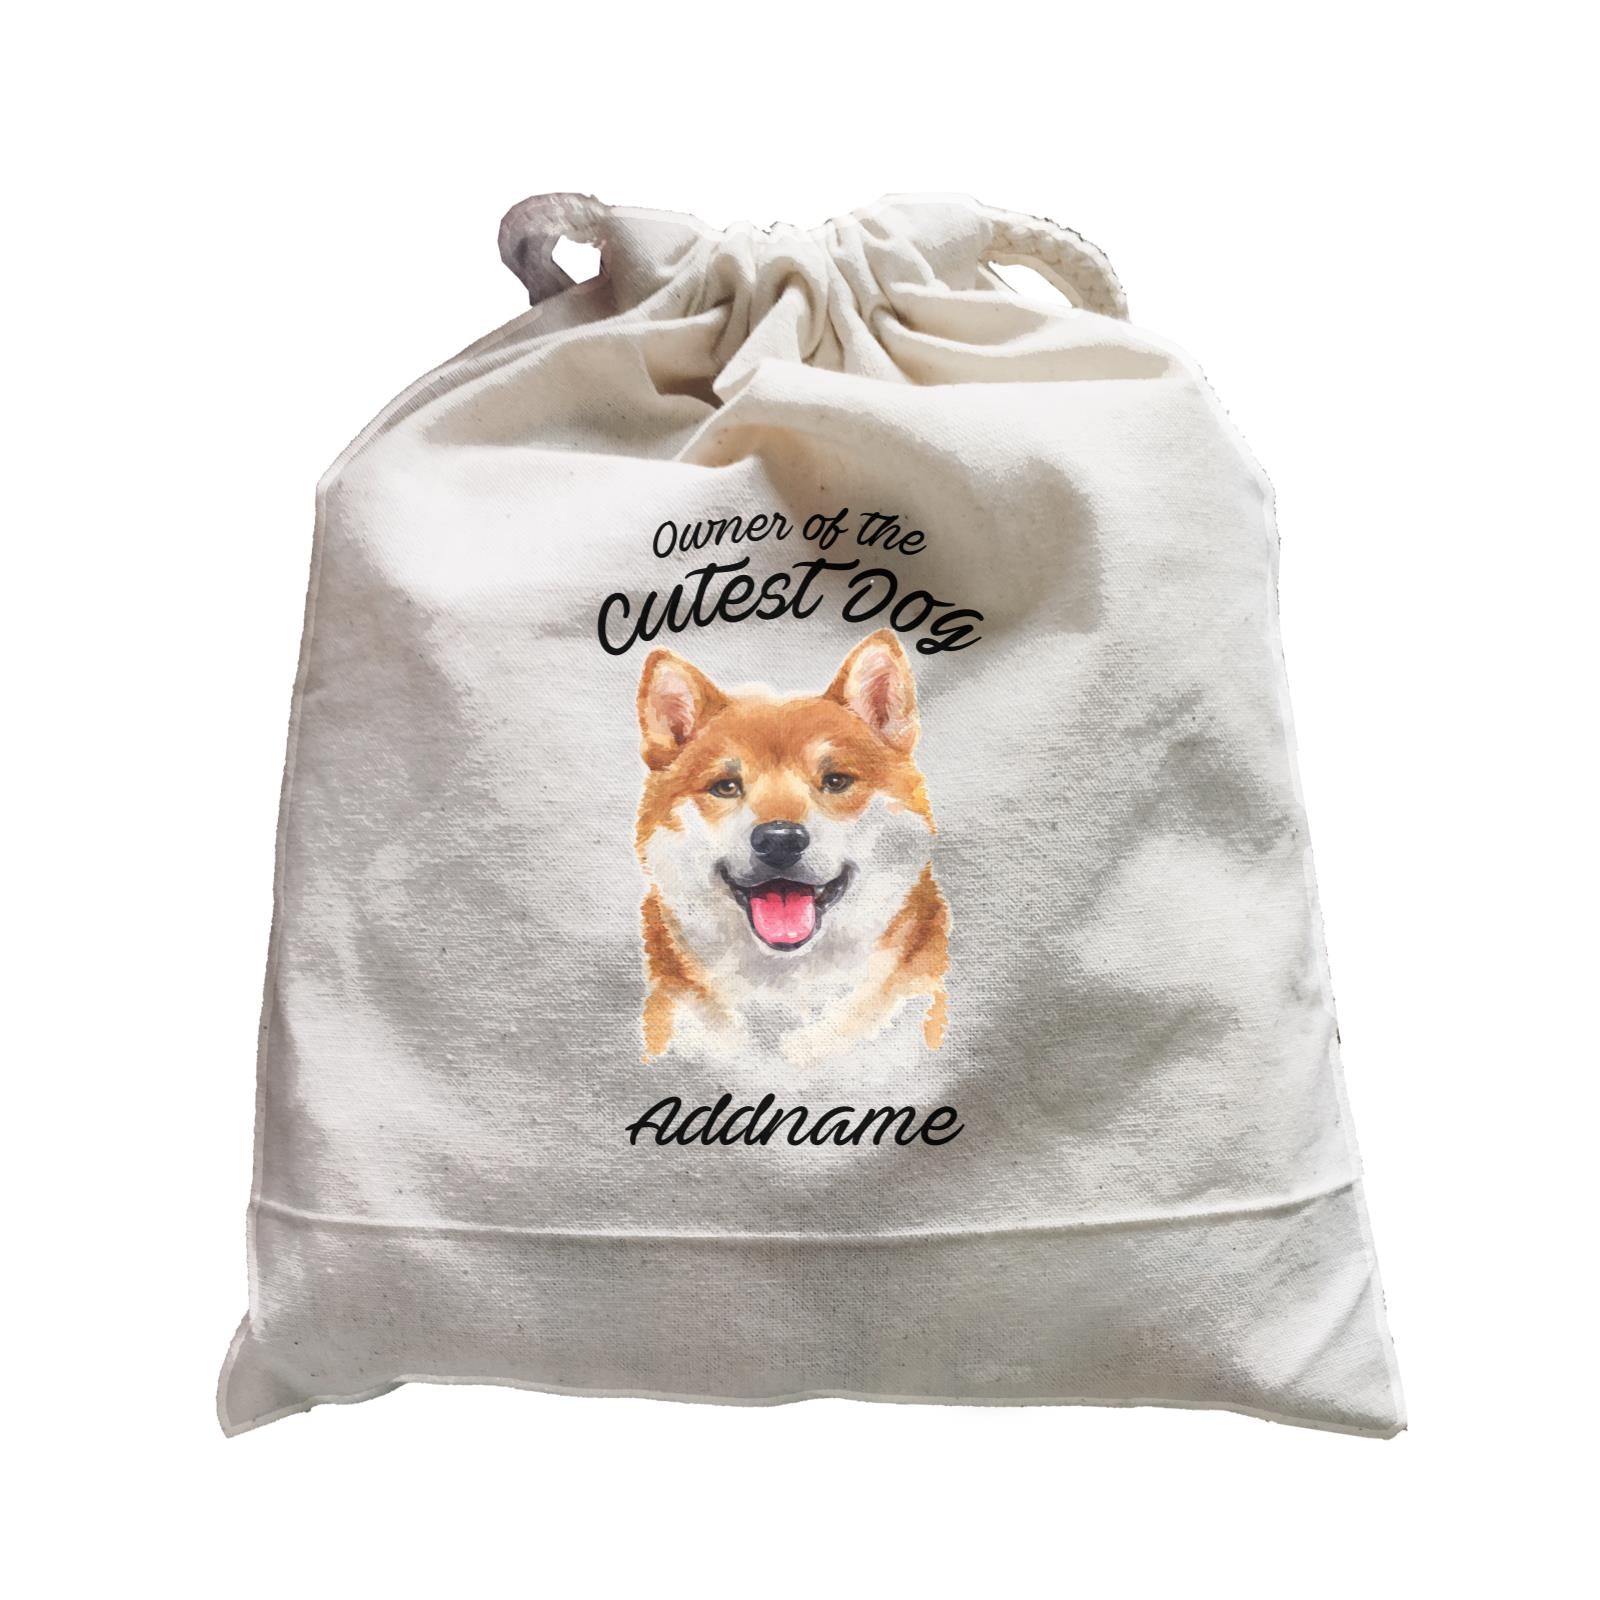 Watercolor Dog Owner Of The Cutest Dog Shiba Inu Addname Satchel